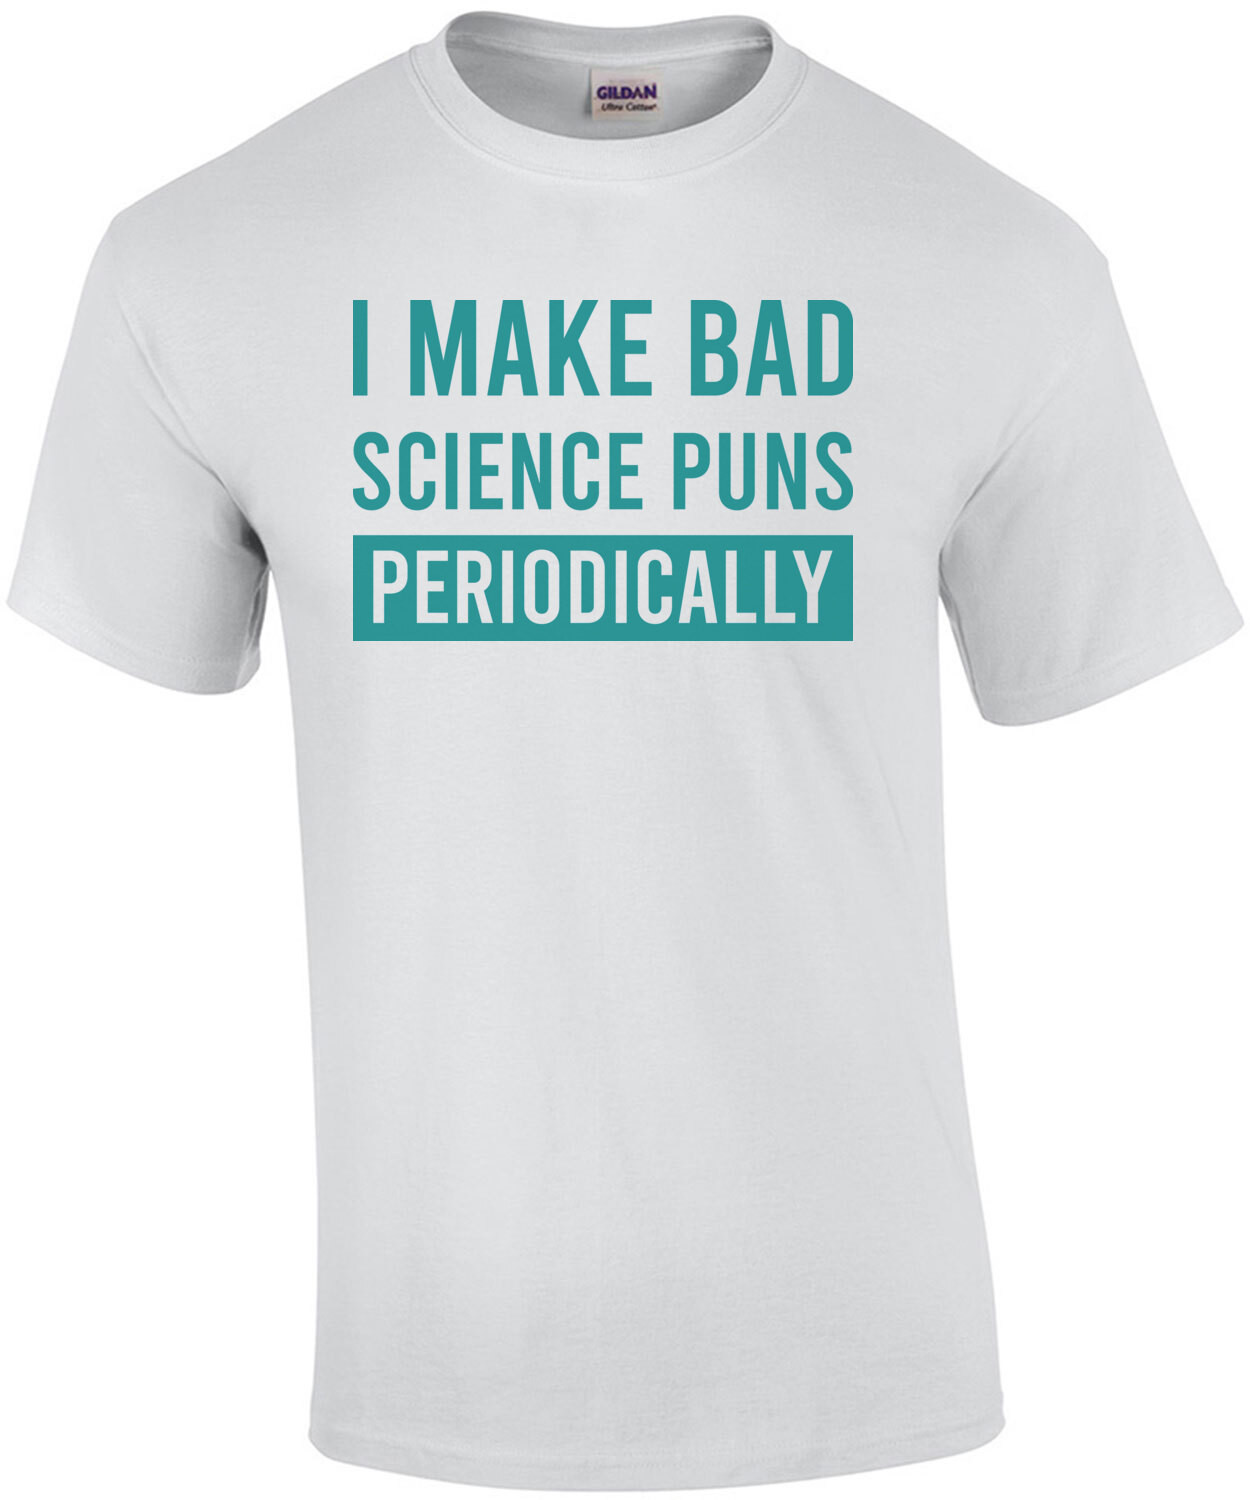 I make bad science puns periodically - funny science pun t-shirt